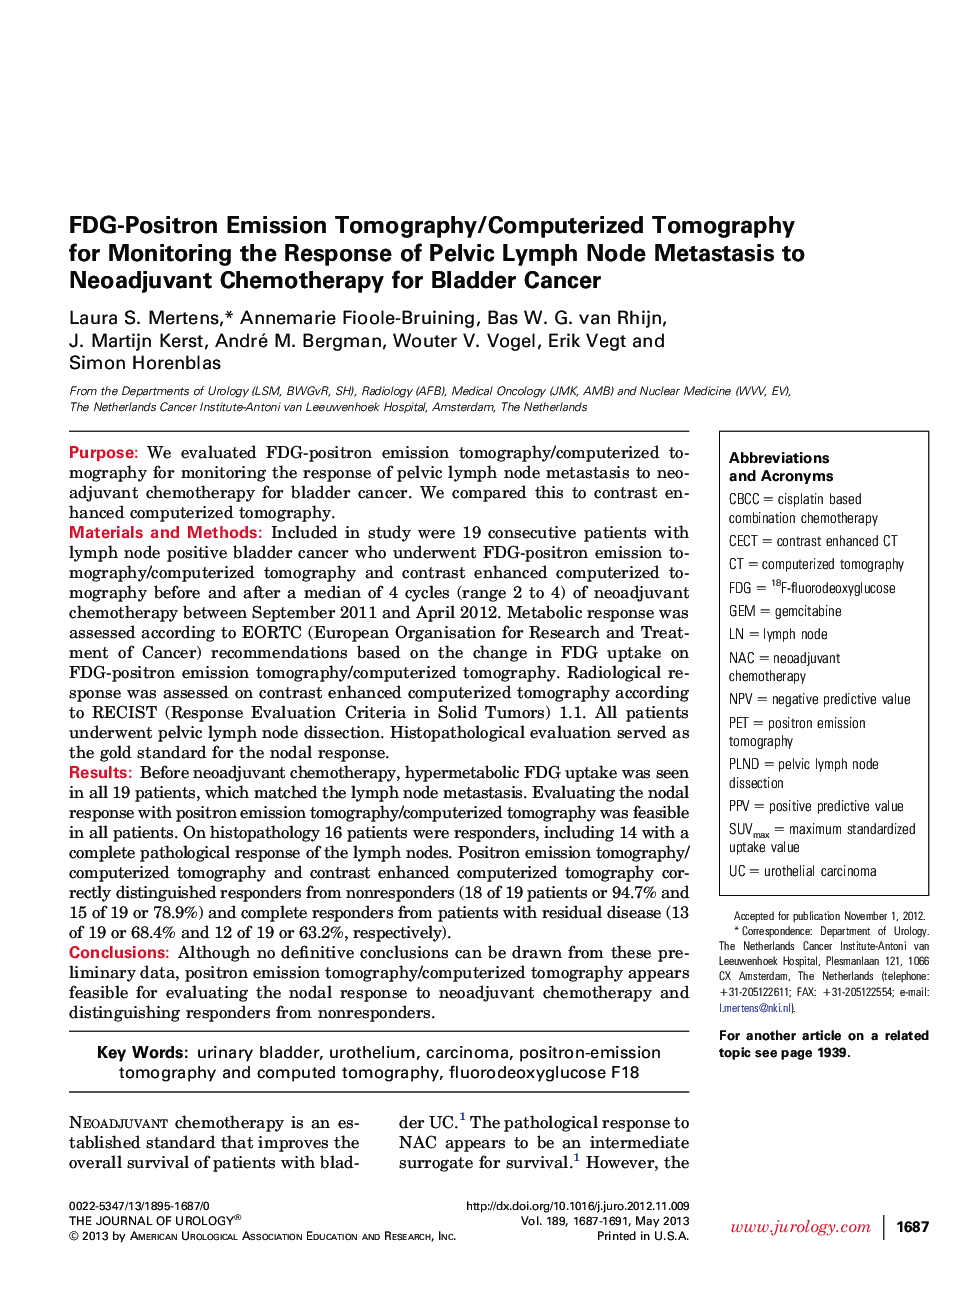 FDG-Positron Emission Tomography/Computerized Tomography for Monitoring the Response of Pelvic Lymph Node Metastasis to Neoadjuvant Chemotherapy for Bladder Cancer 